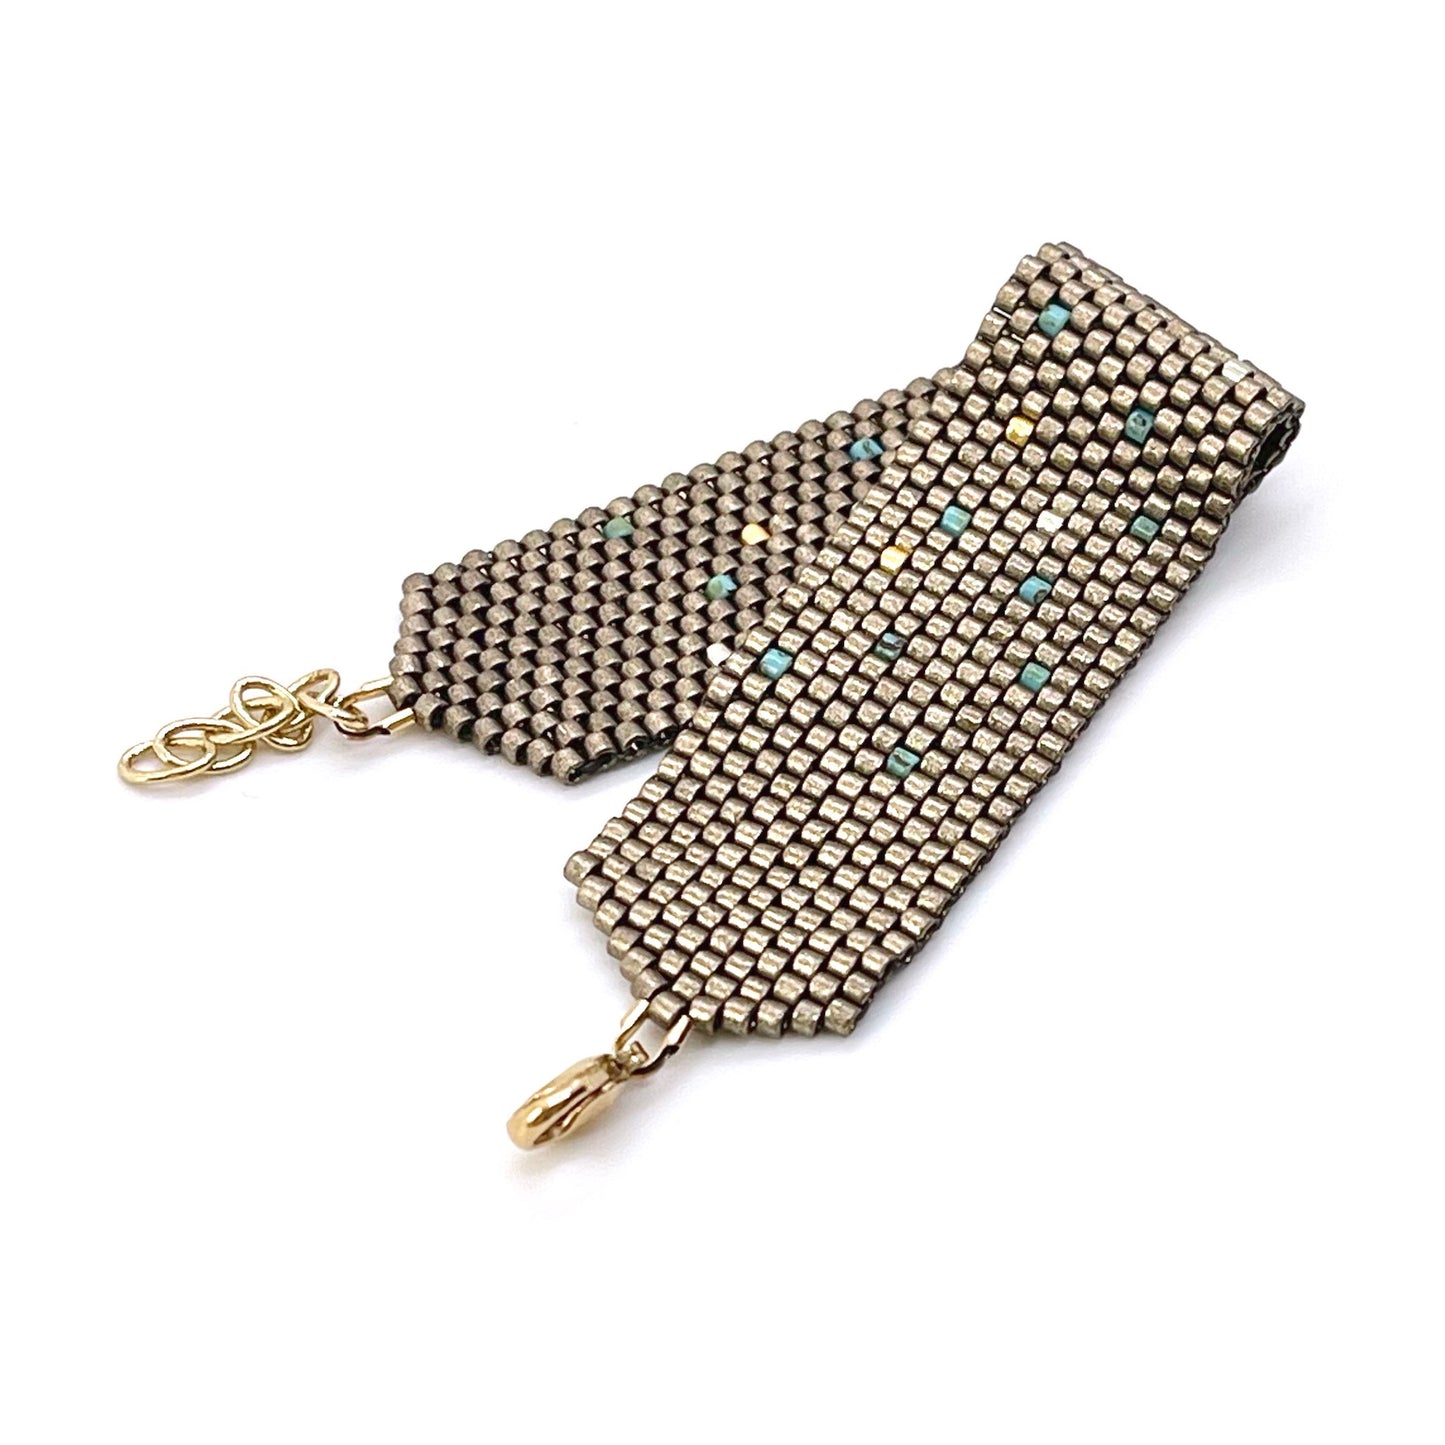 Pewter bracelet | Wide woven seed bead bracelet sprinkled with turquoise and silver/gold-tone beads.